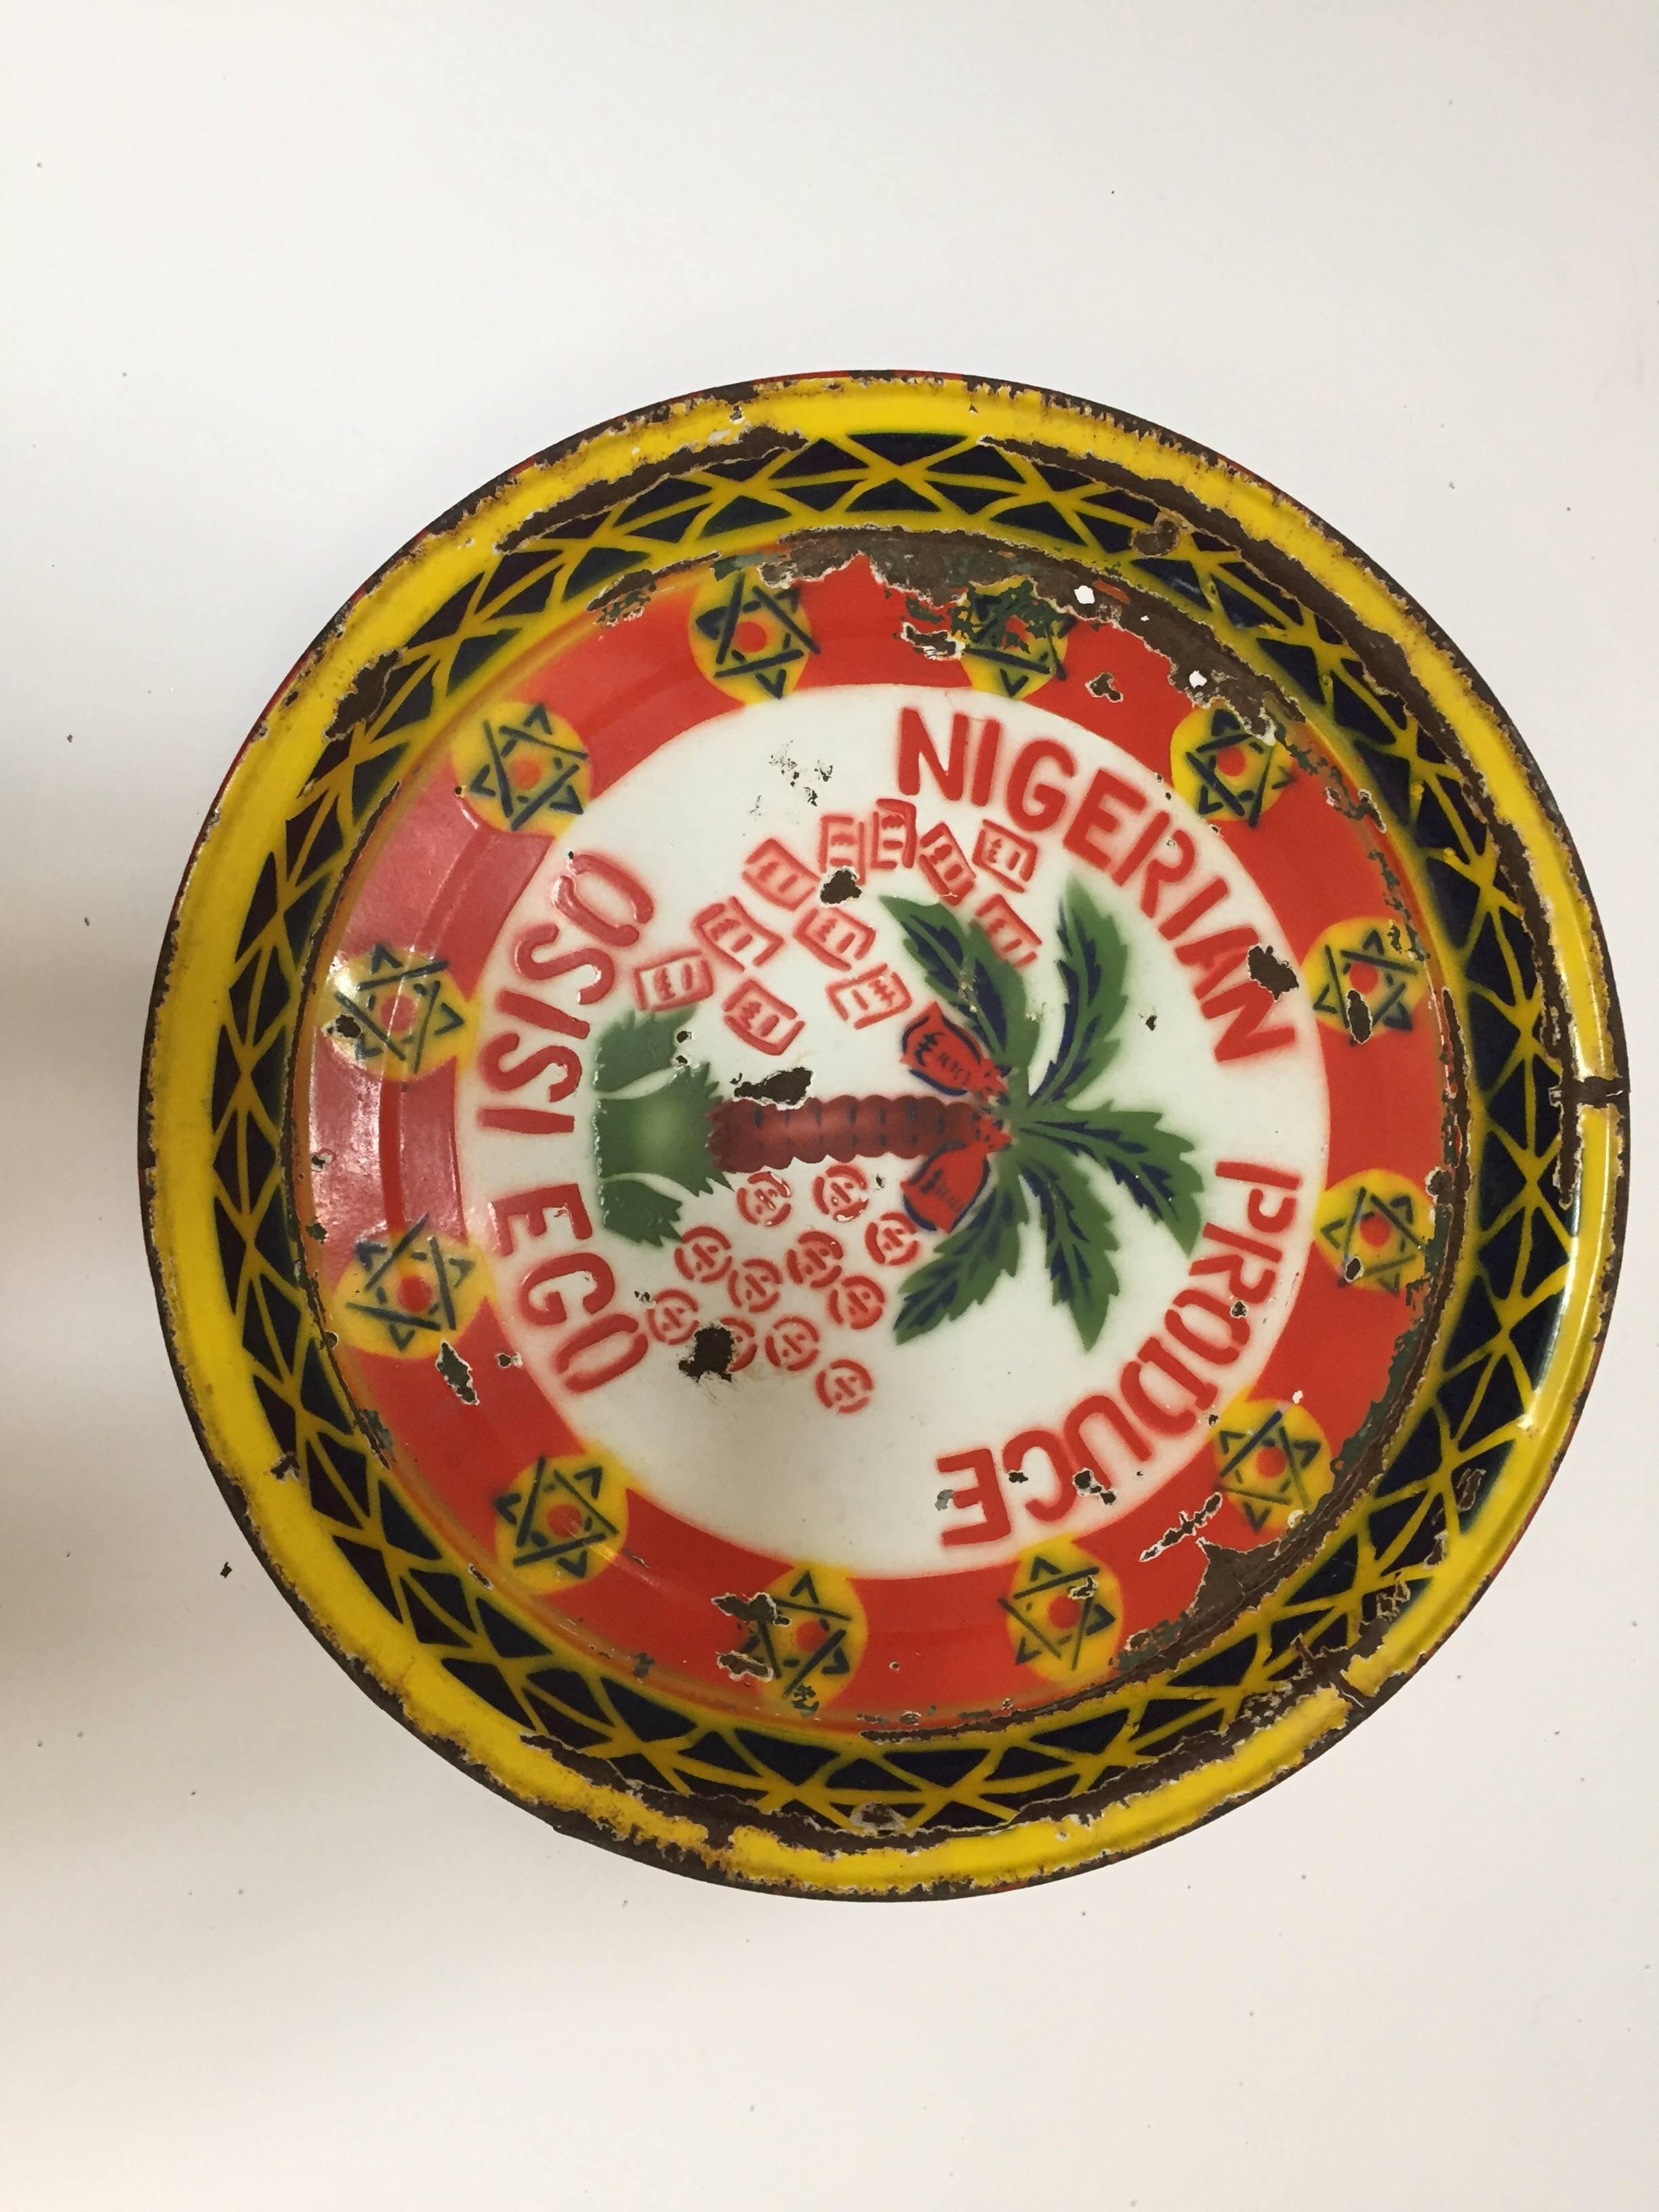 Nigerian metal vintage advertising platter plaque.
Great African Folk Art advertising from Niger.
Round large metal plate in red and white, green and yellow primary colors with a design of a palm tree, cocos and inscription of 